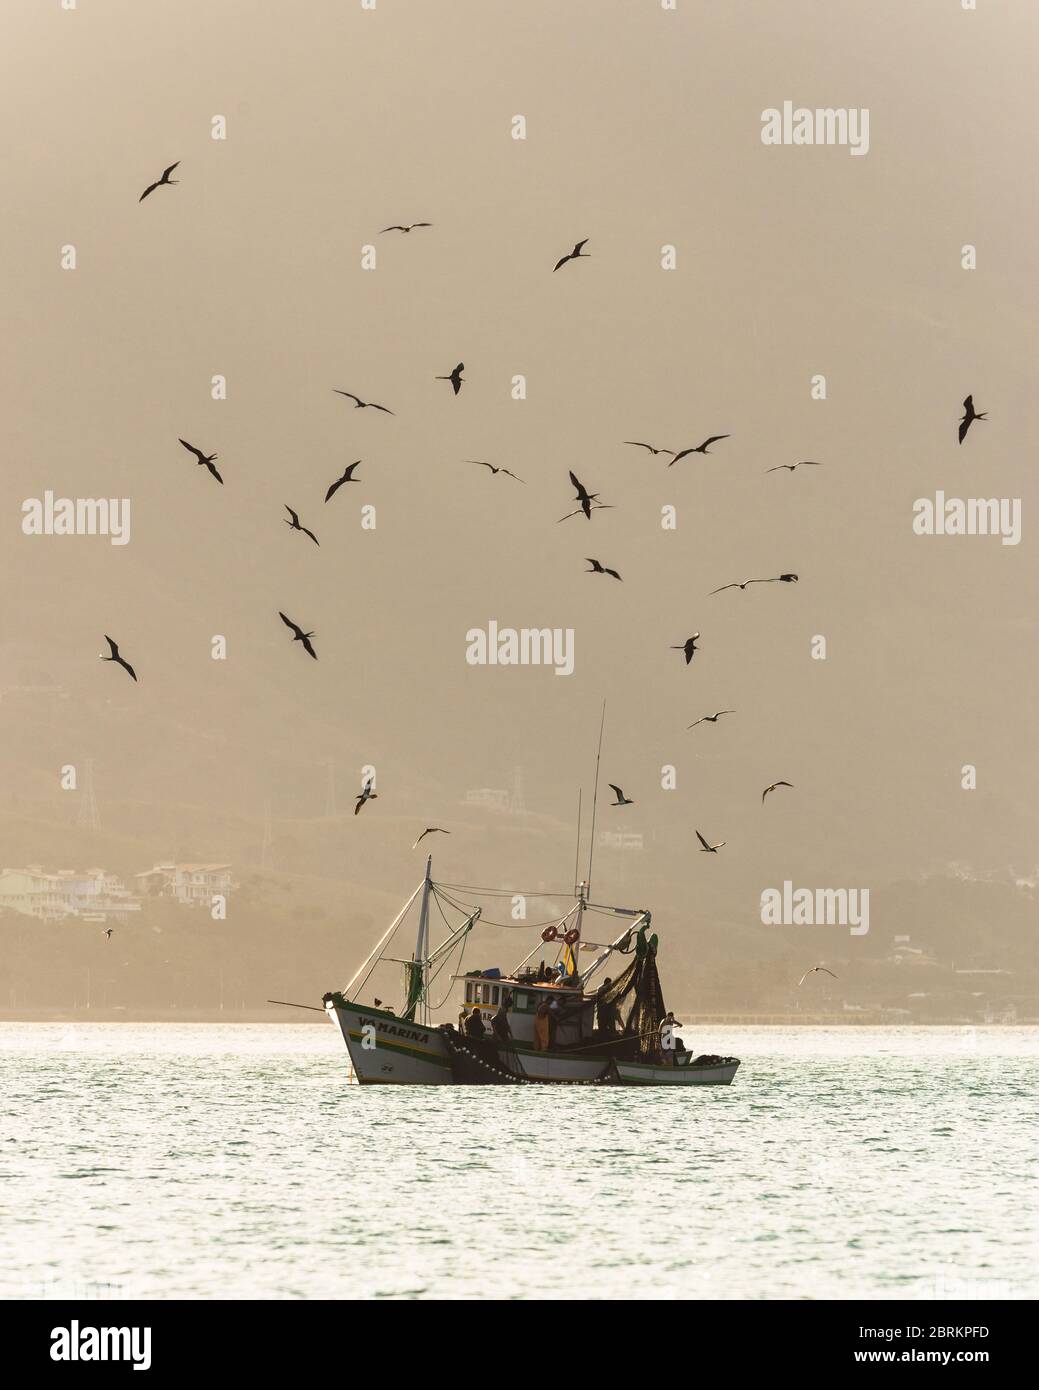 Commercial trawler with a group of Frigatebirds flying above, Ilhabela, Brazil Stock Photo